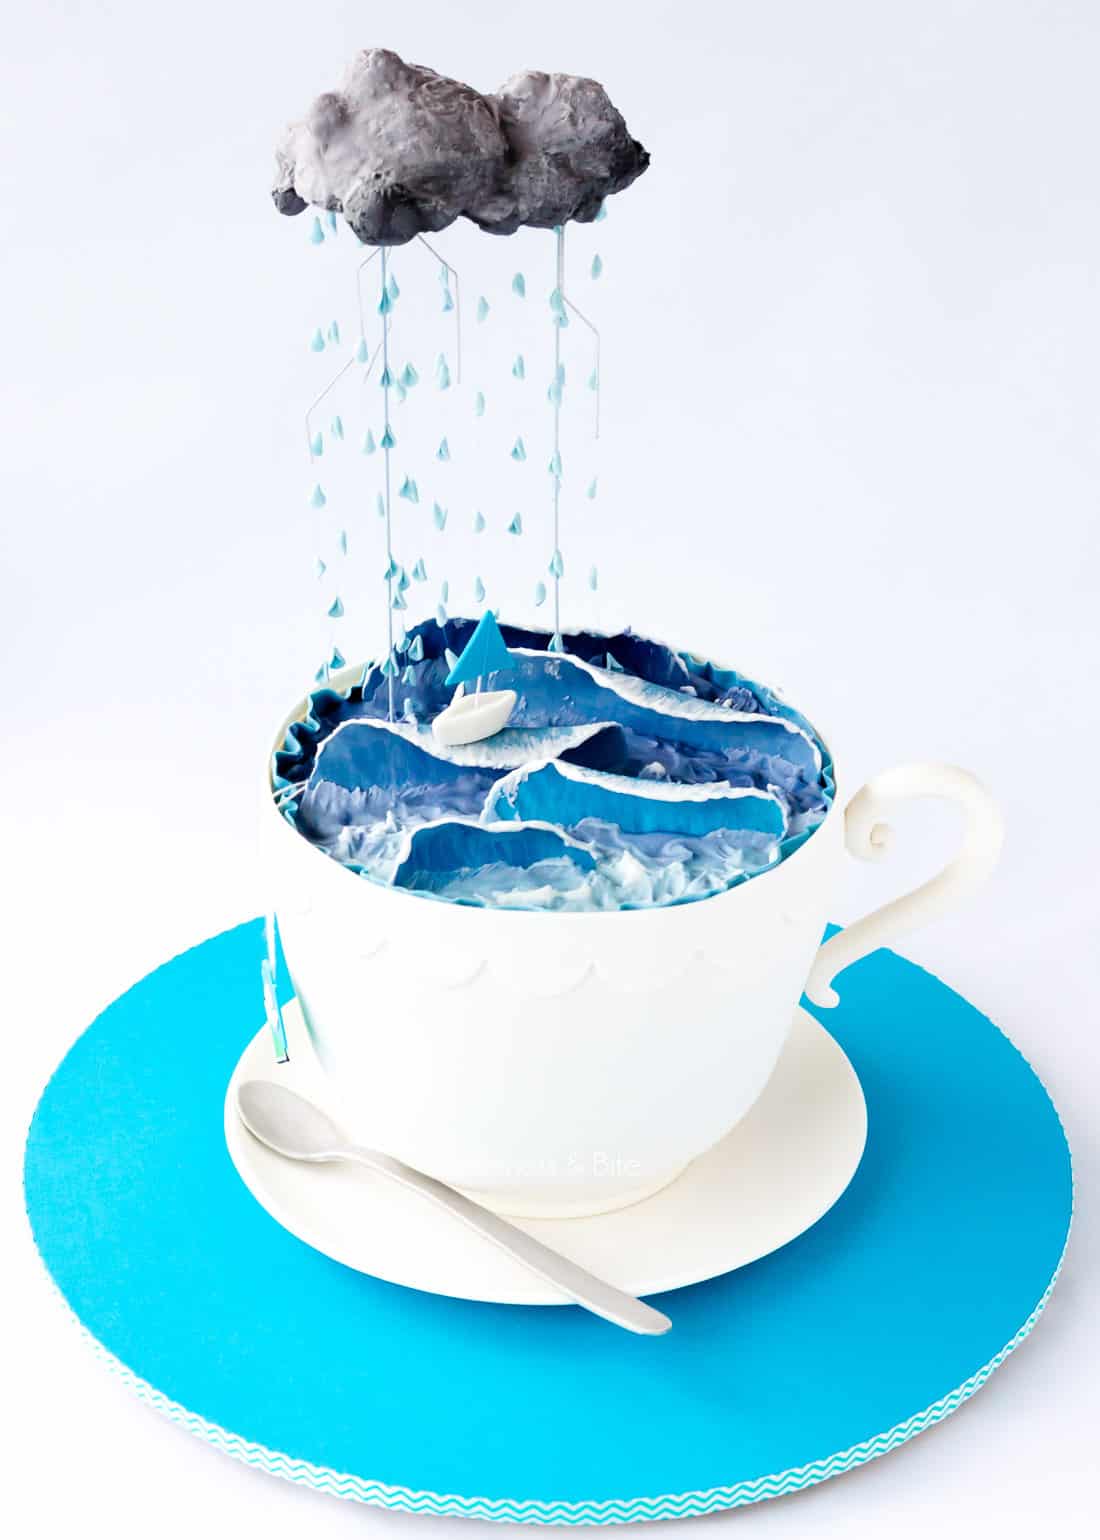 A "Storm in a Teacup" cake - cake in the shape of a teacup, with decorated with waves and rainclouds.